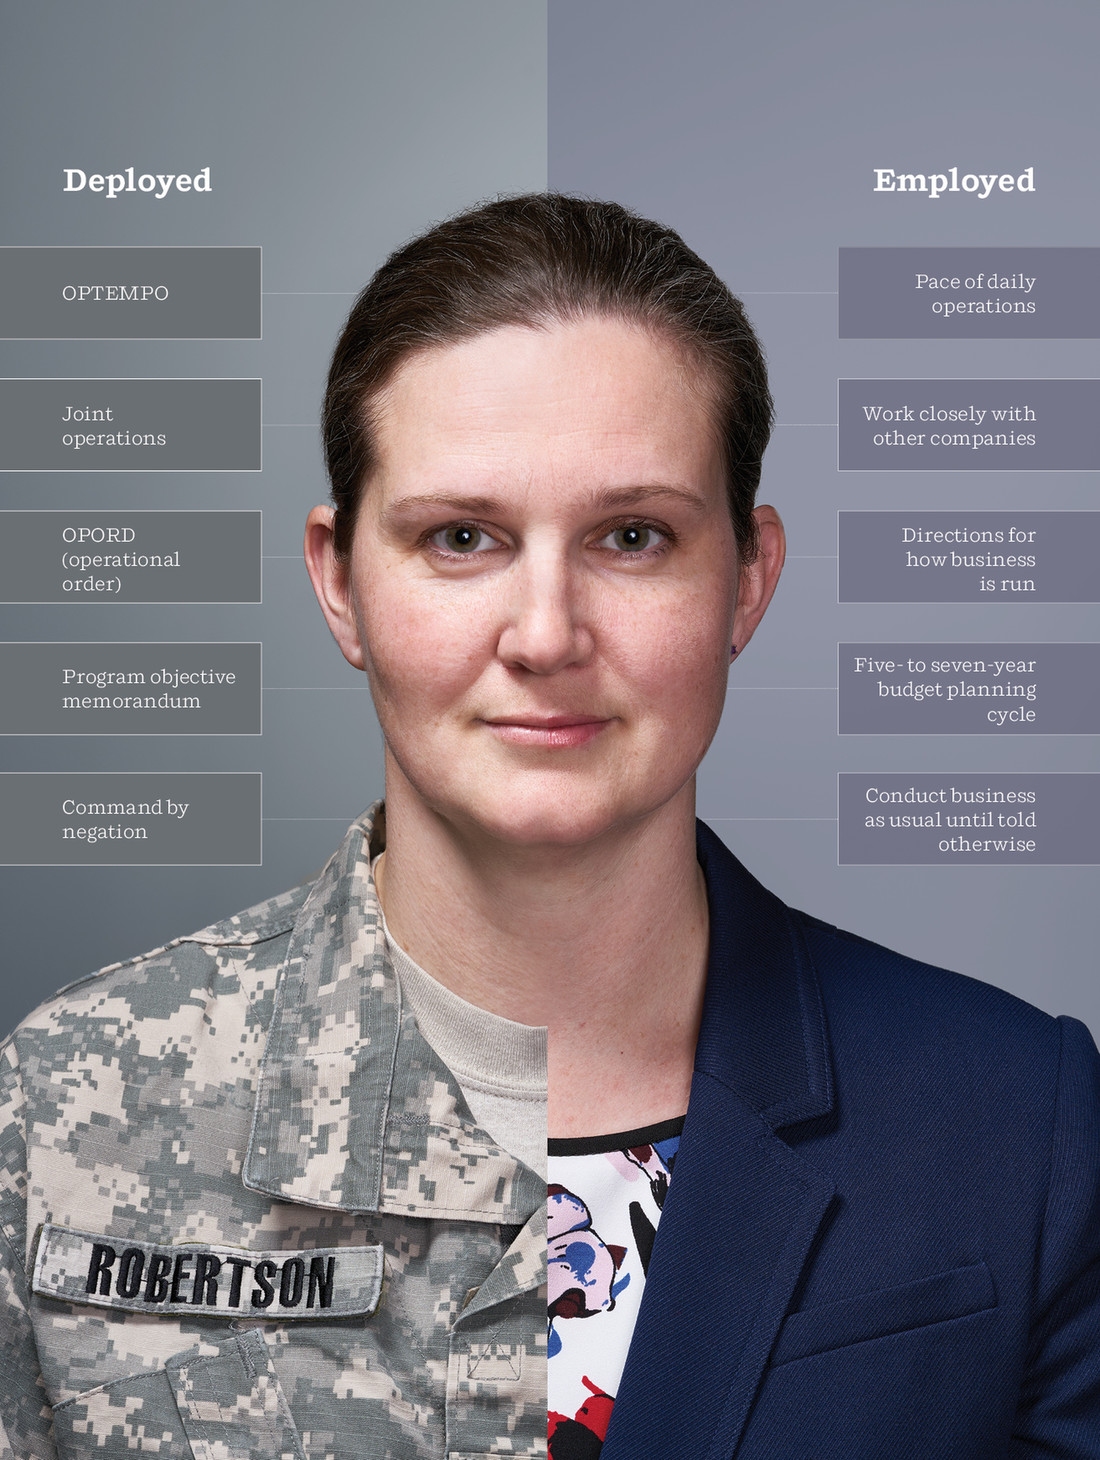 Image of student veteran Katie Robertson with military and business terms